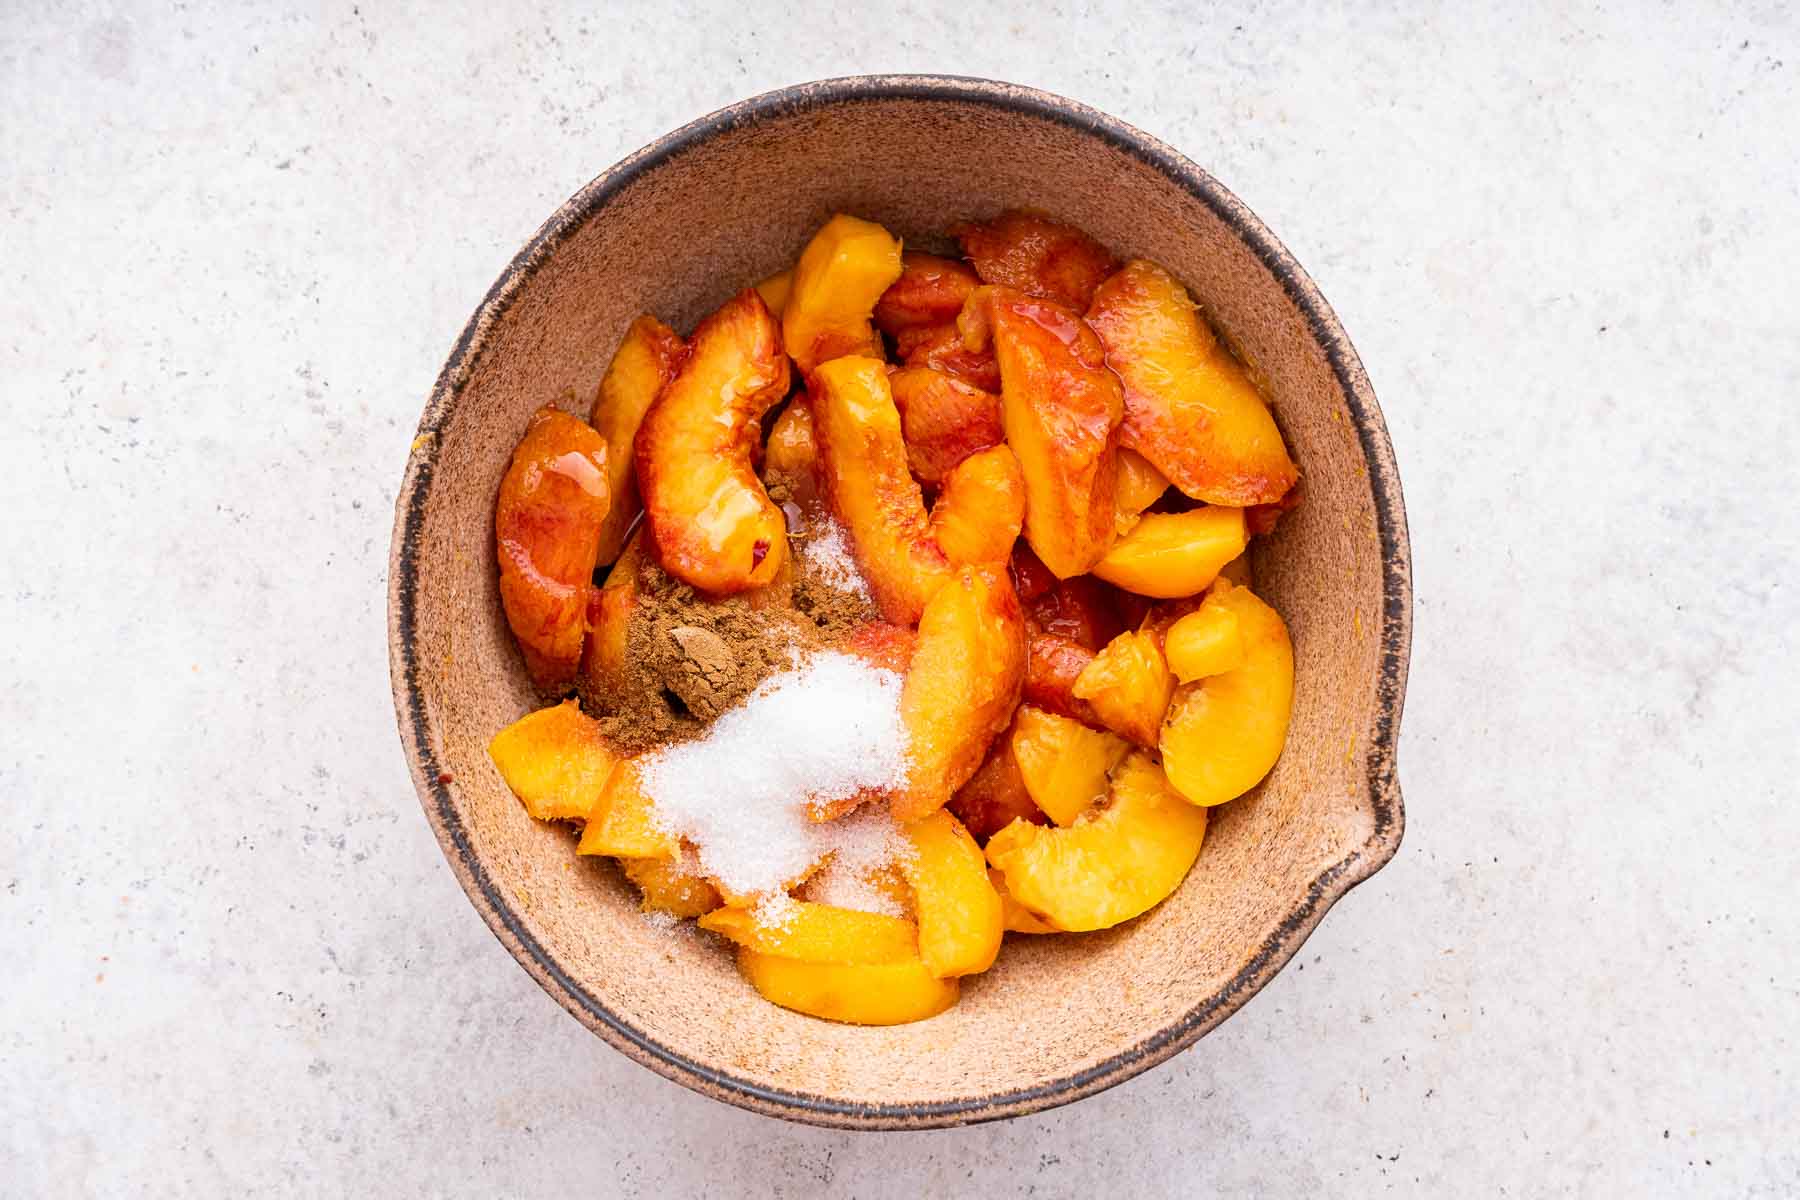 Bowl of sliced fresh peaches with sugar and cinnamon sprinkled on top.